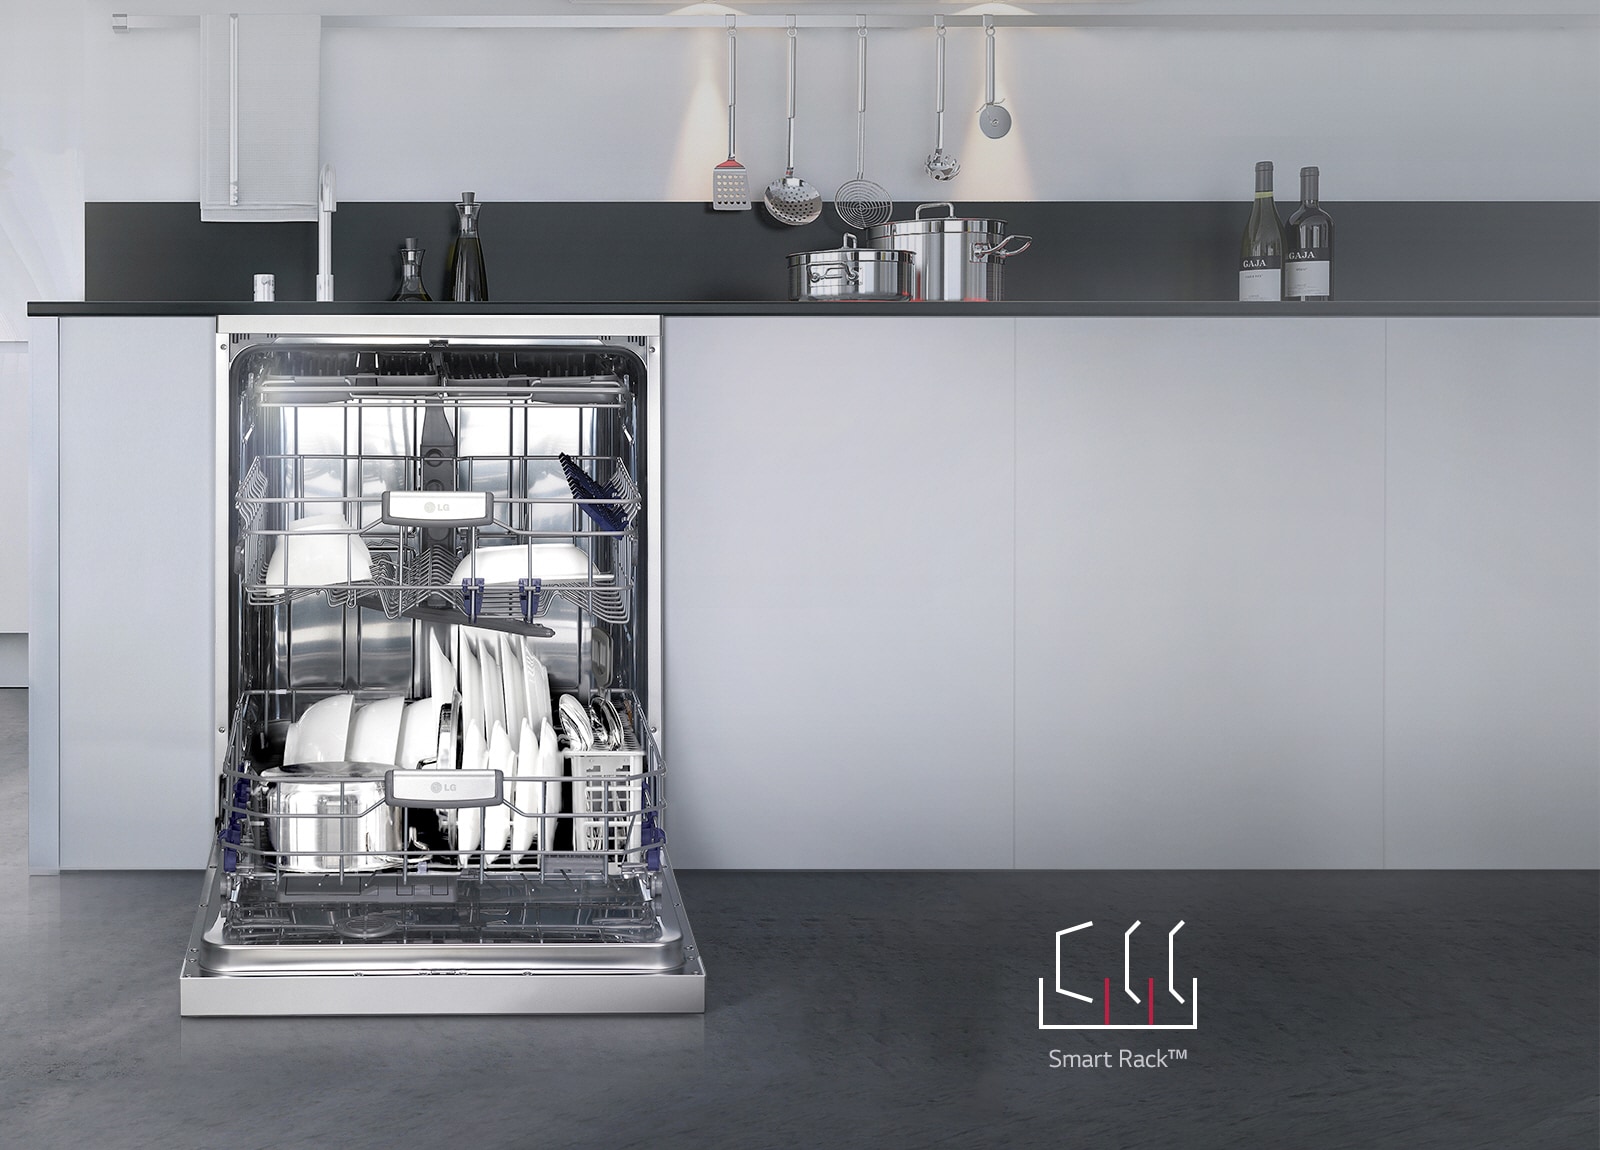 Smart Rack™ Efficiently Load More Dishes